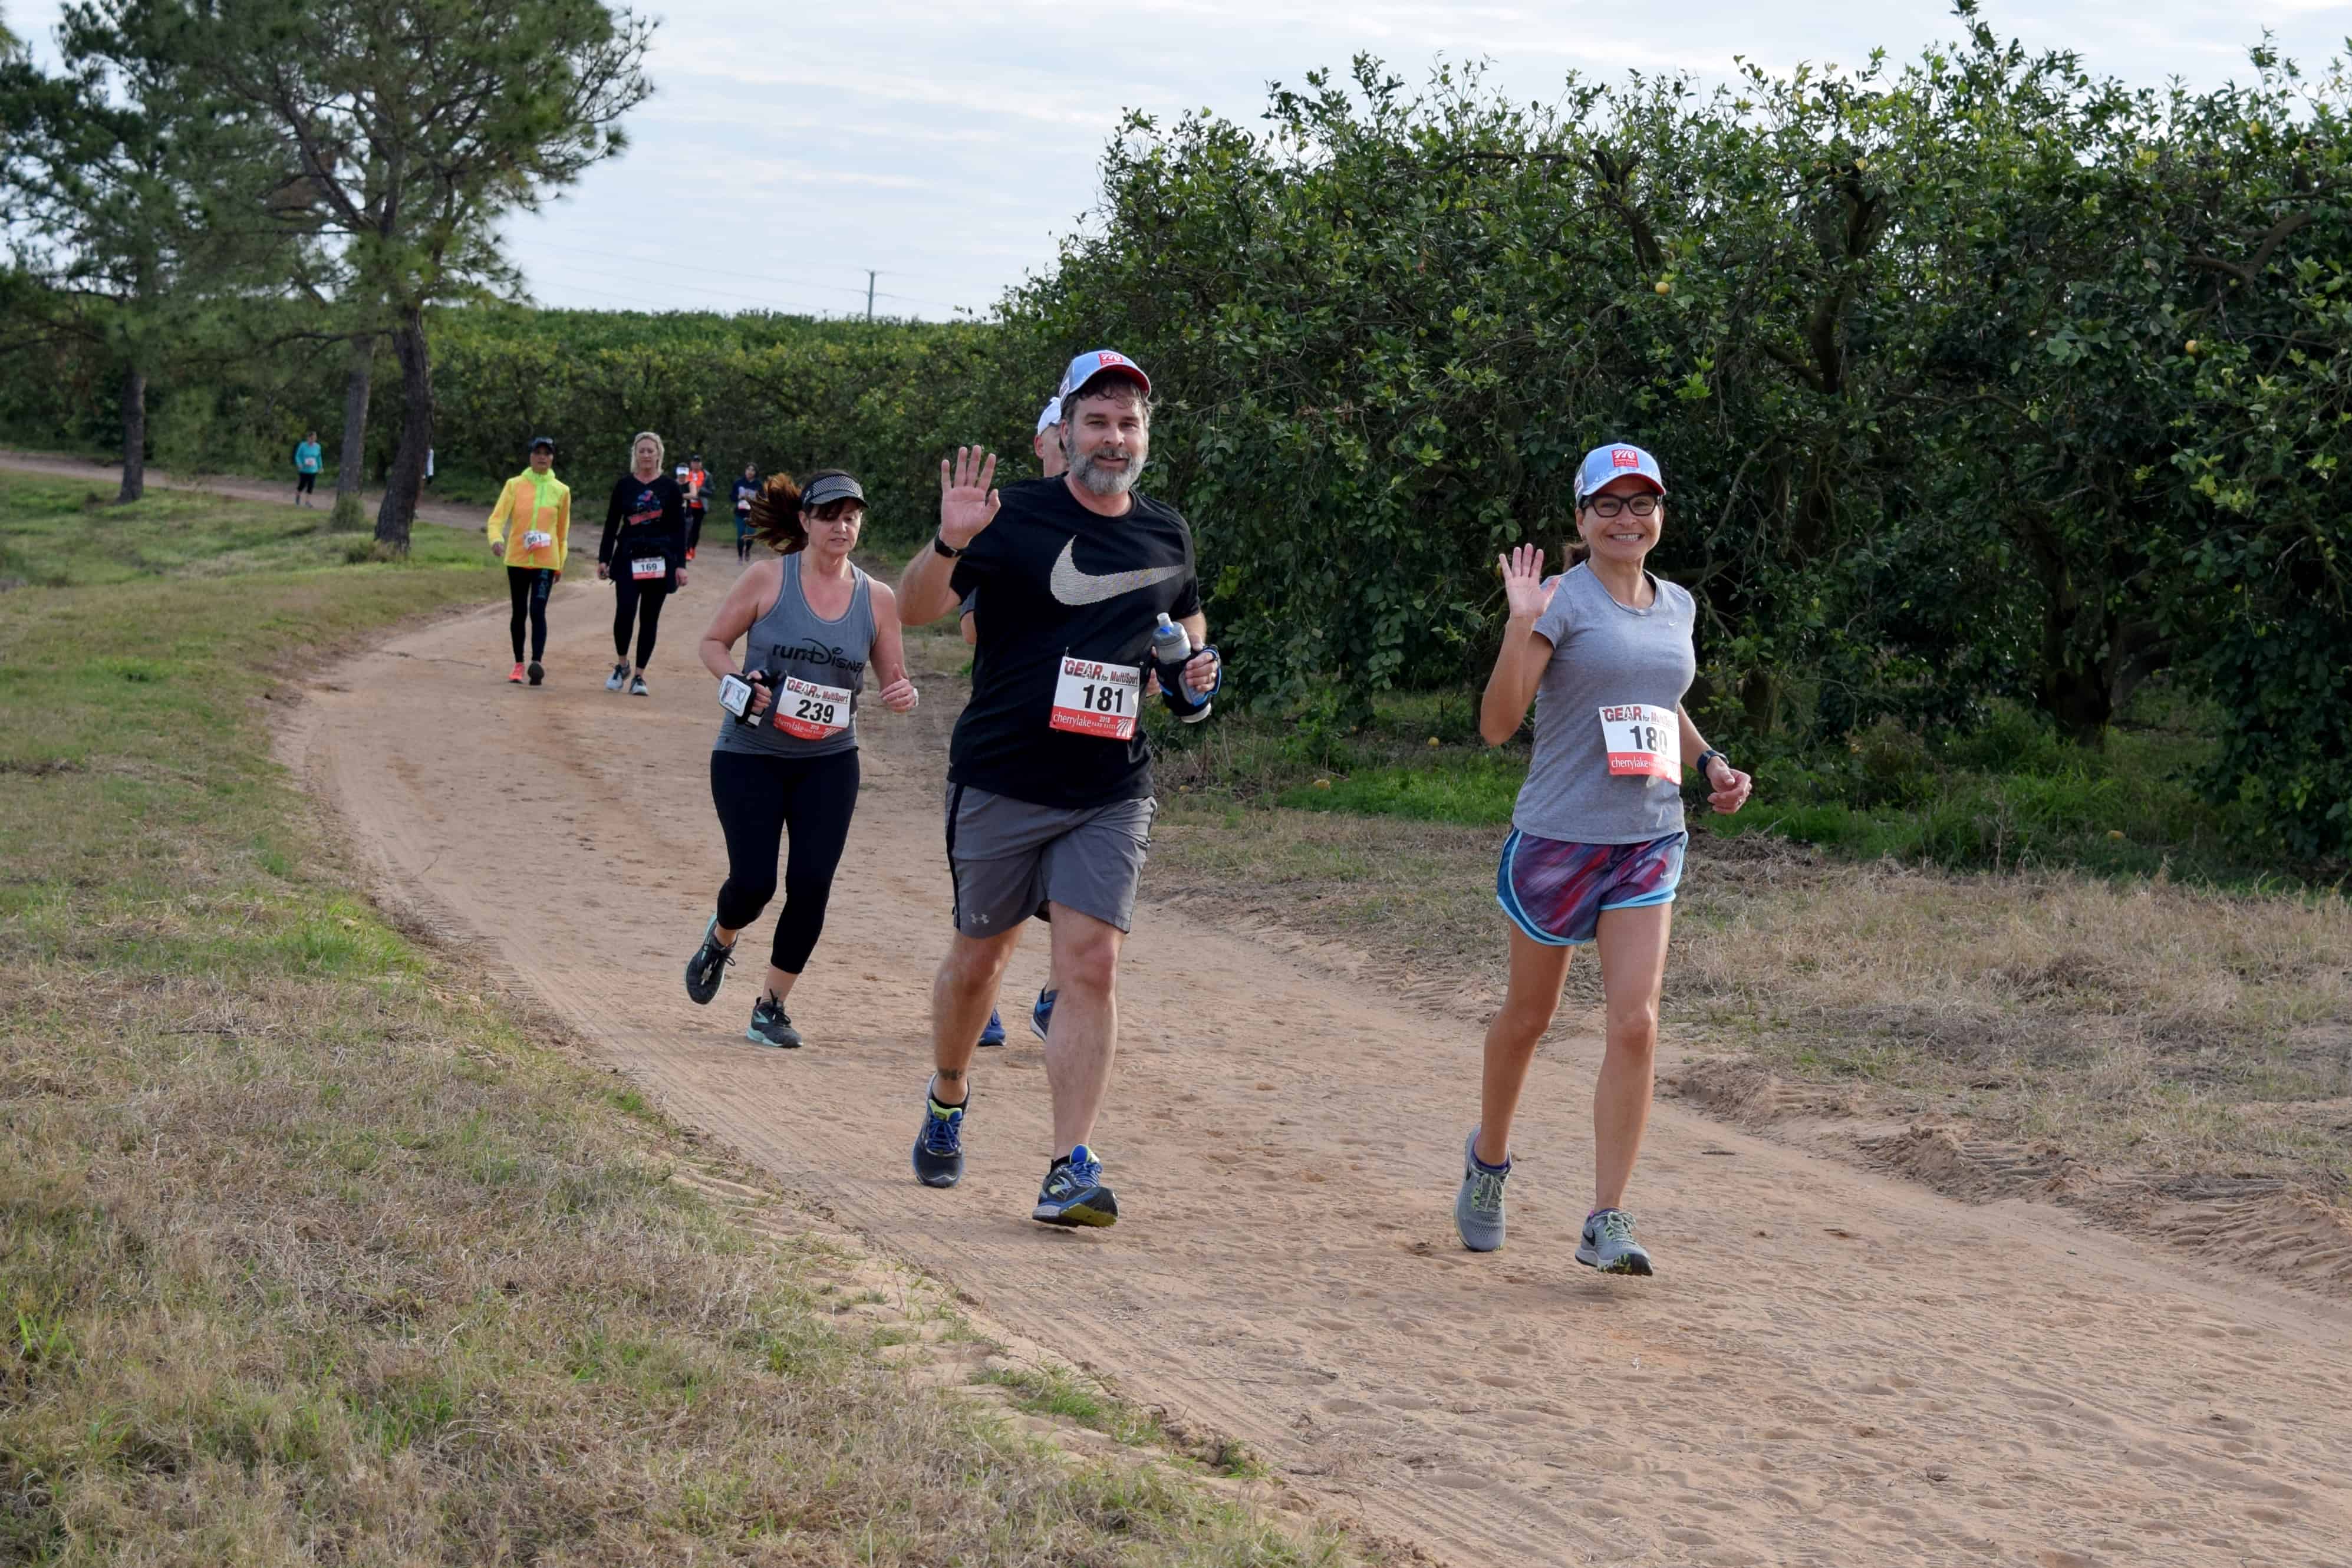 A couple running alongside each other wave to the camera as they run on an off-road trail surrounded by citrus trees.